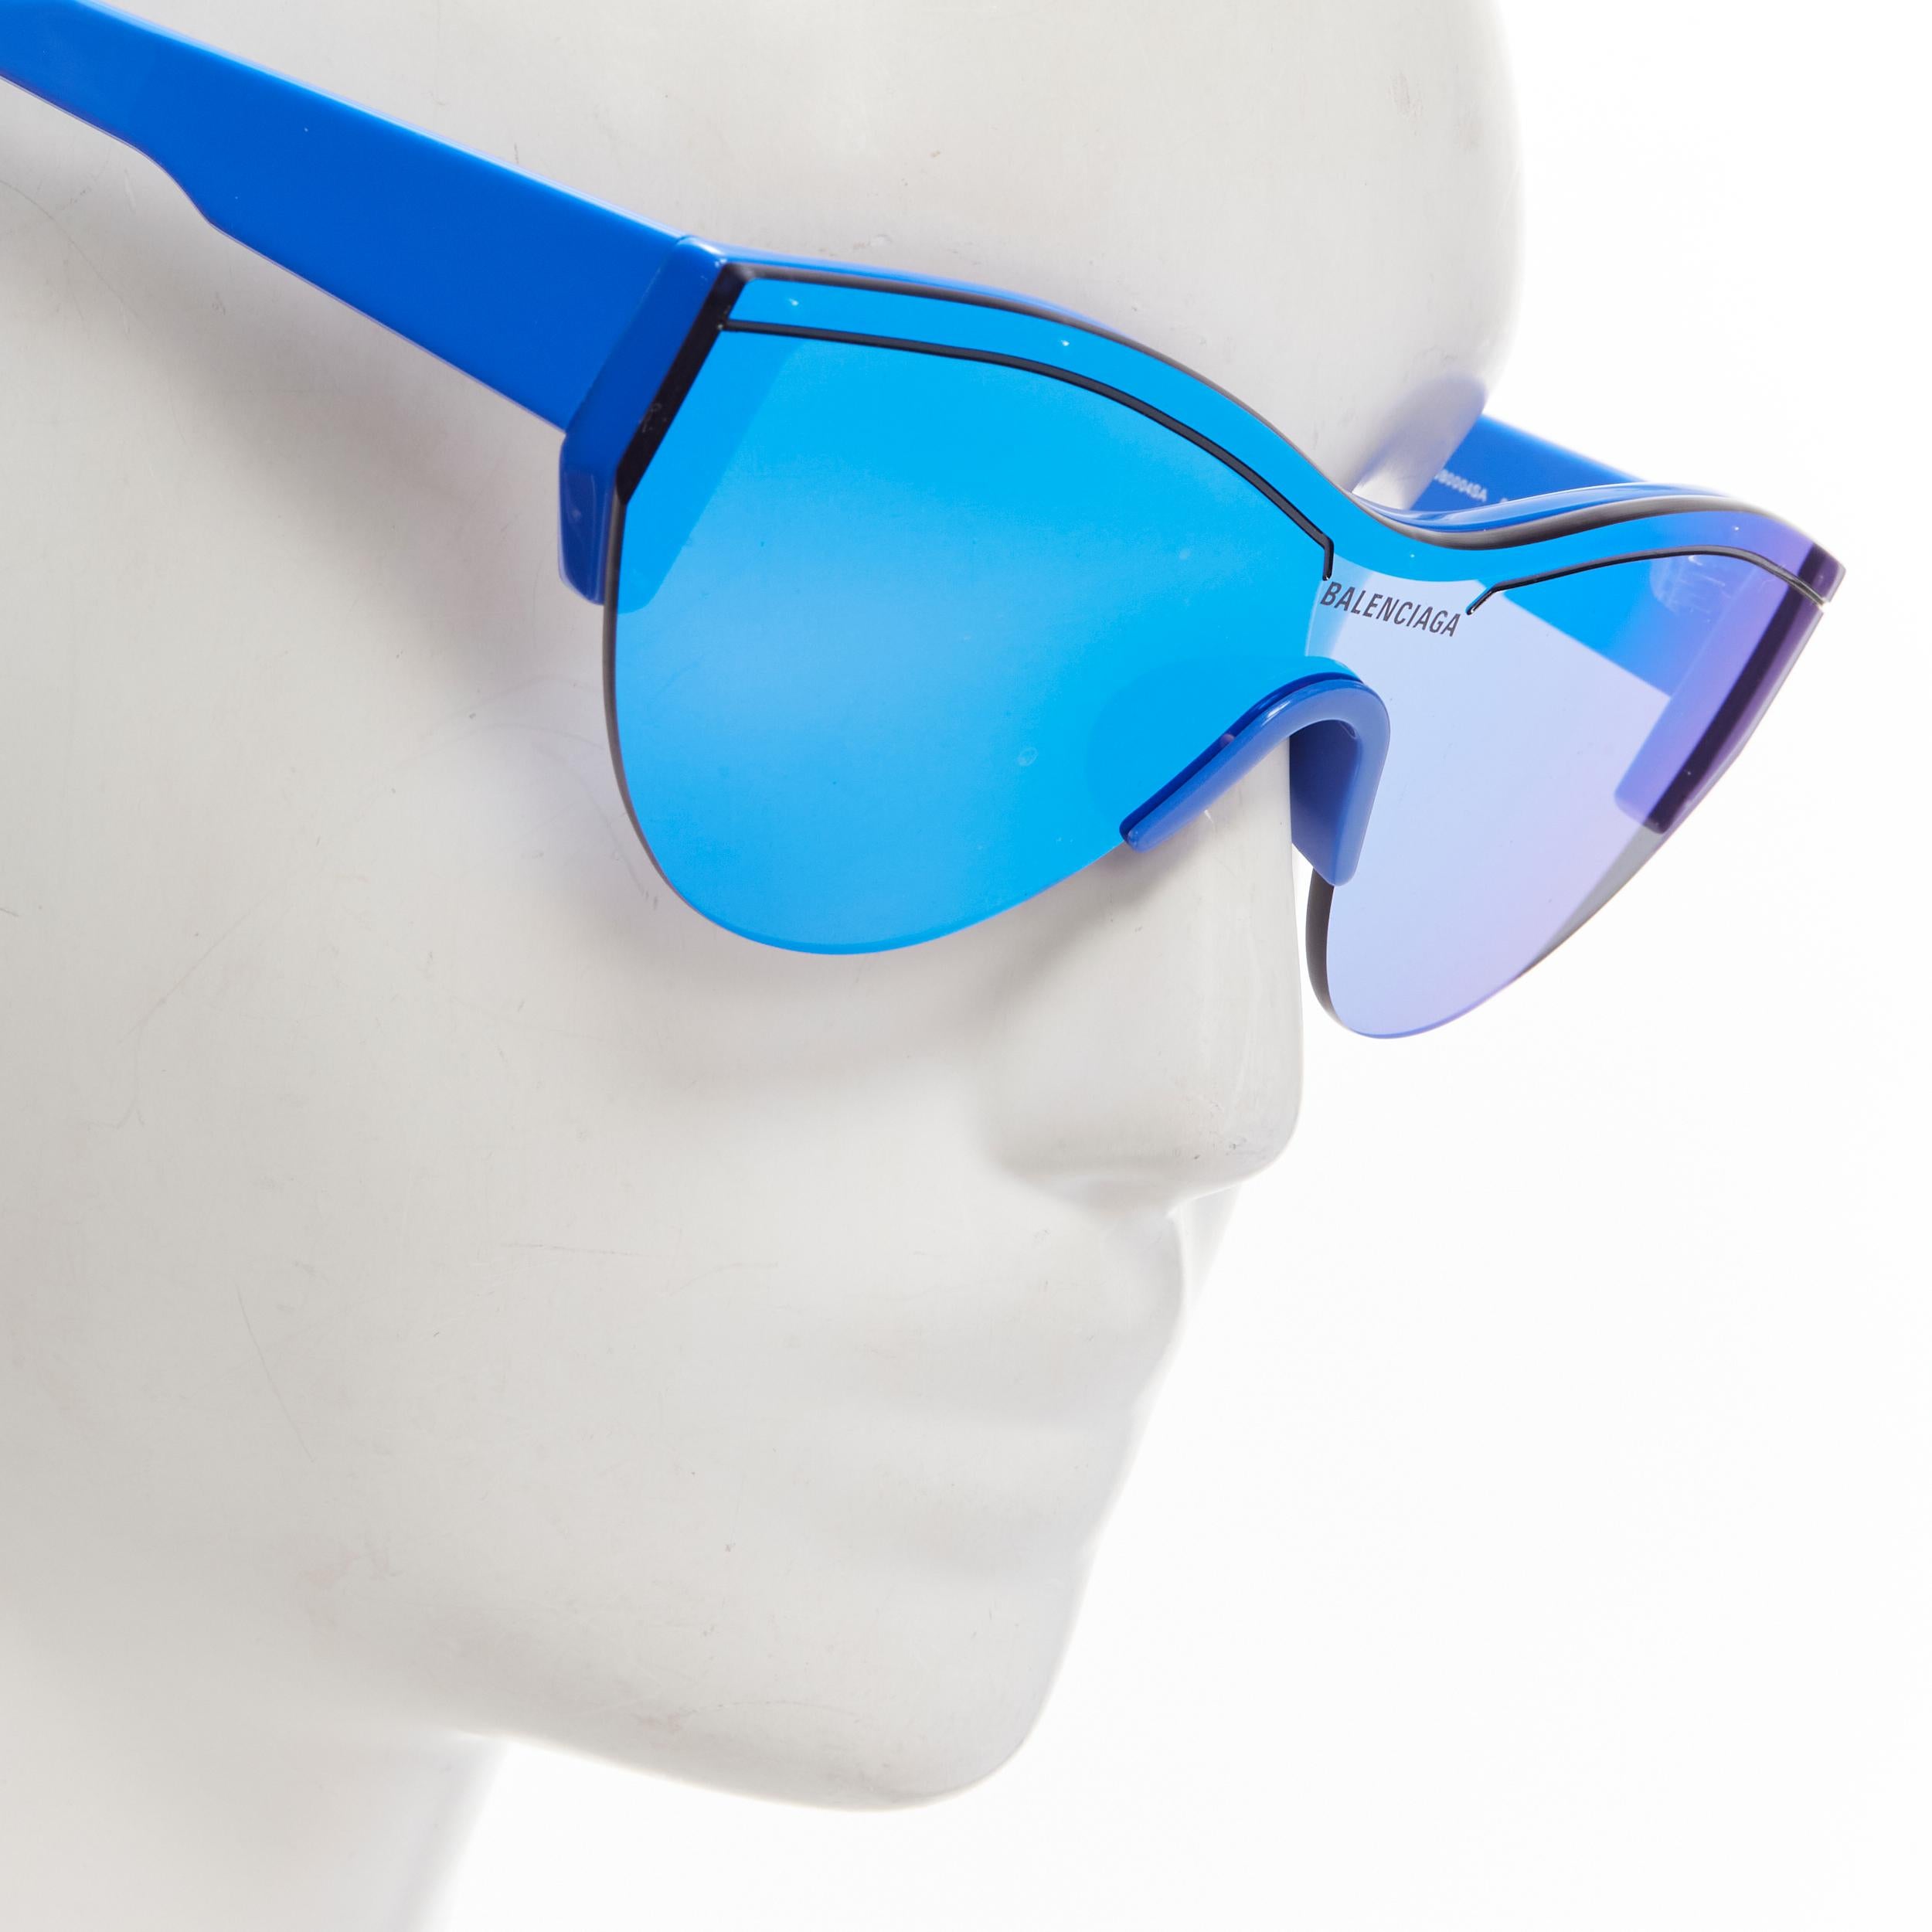 BALENCIAGA DEMNA BB0004SA blue mirrored reflective acetate temple sunglasses 
Reference: ANWU/A00084 
Brand: Balenciaga 
Designer: Demna 
Material: Acetate 
Color: Blue 
Pattern: Solid 
Made in: Italy 


CONDITION: 
Condition: Excellent, this item